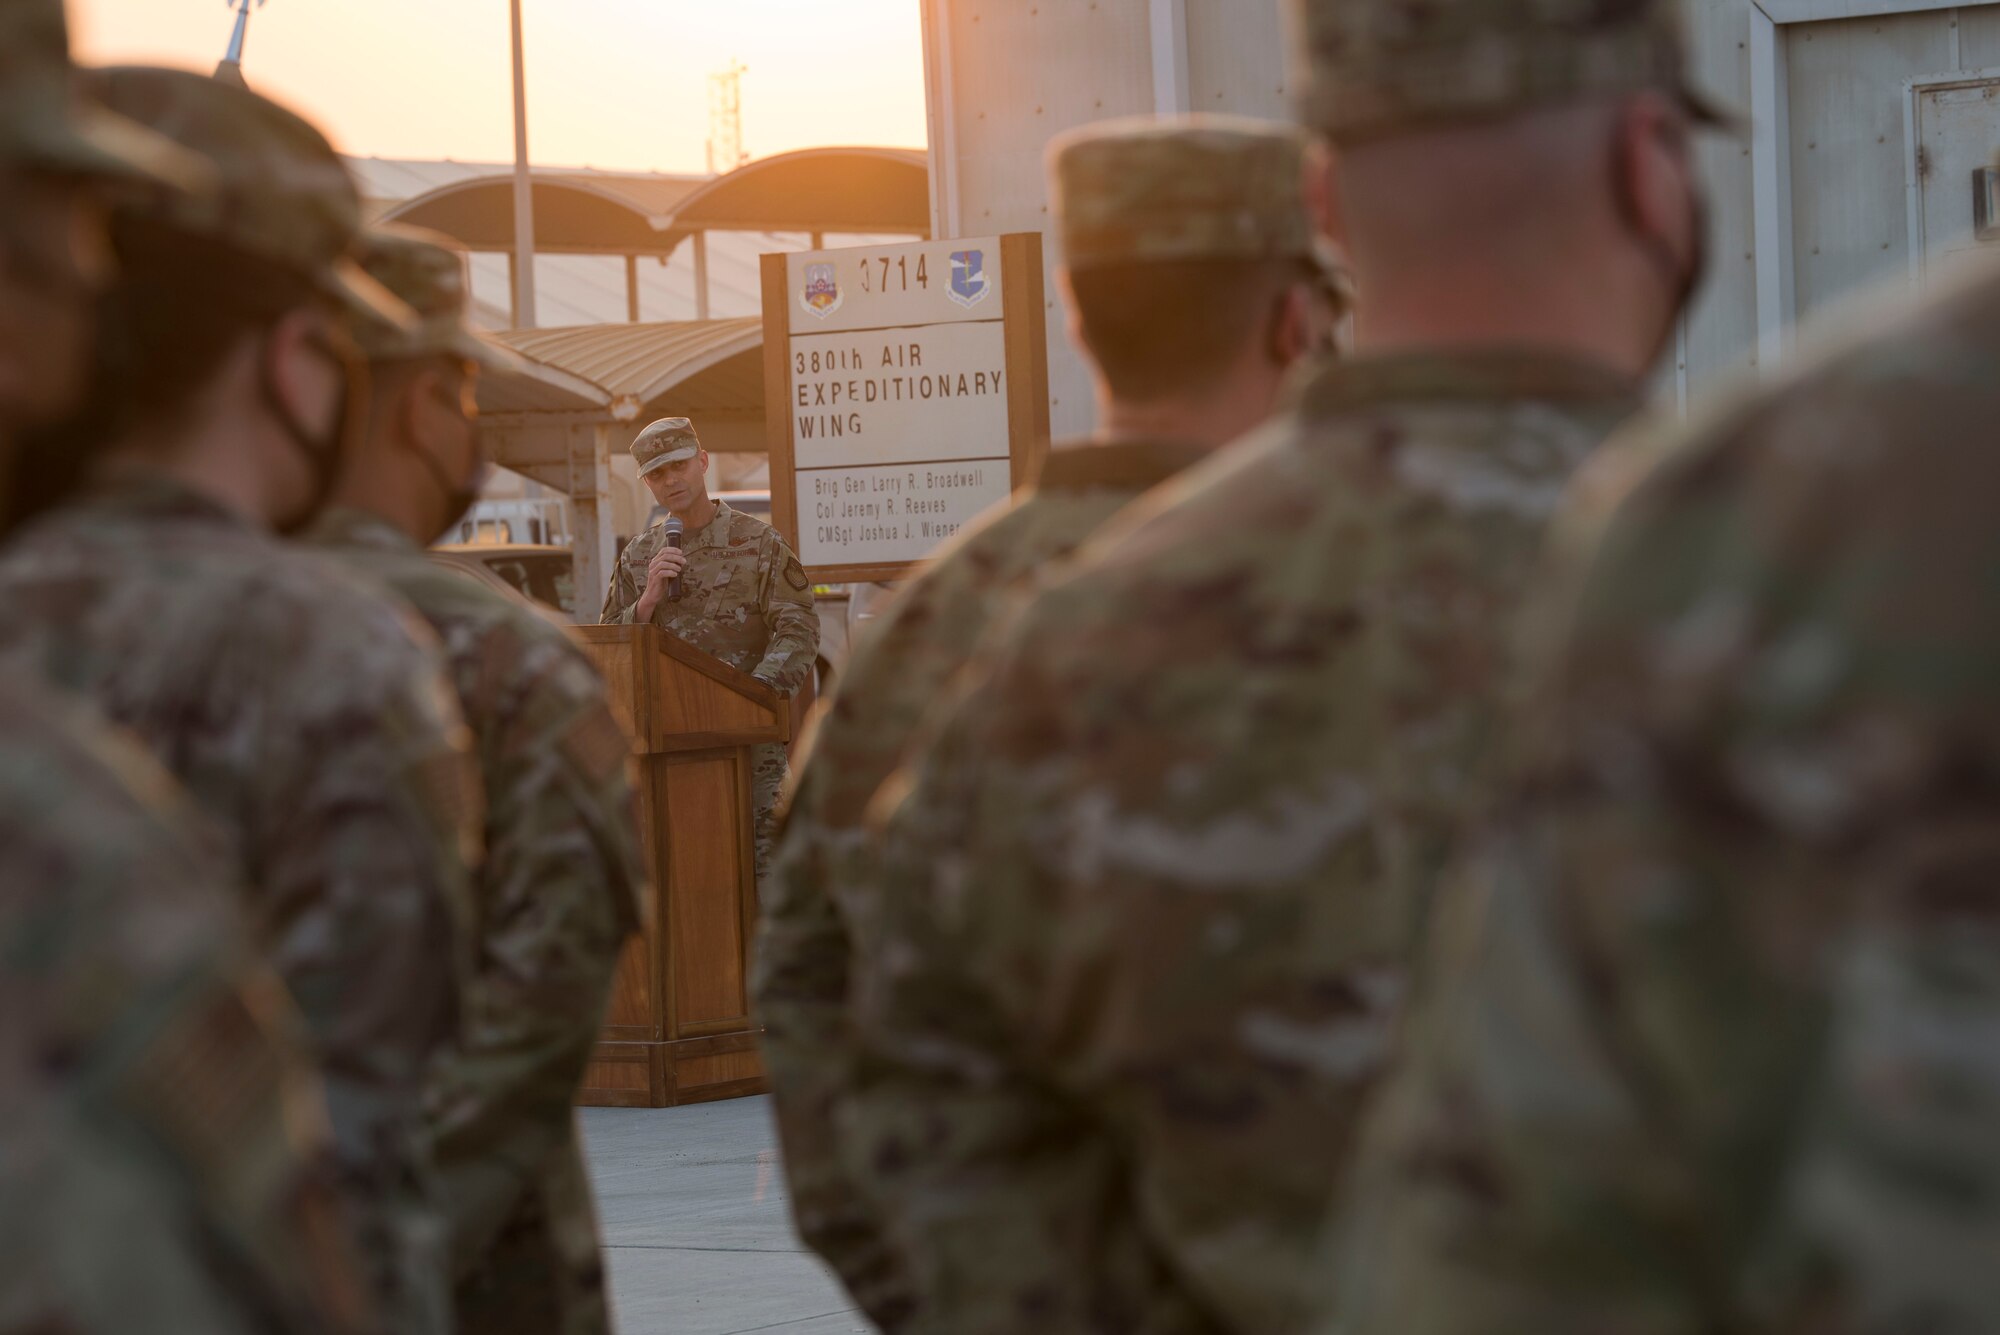 U.S. Air Force Brig. Gen. Larry R. Broadwell, 380th Air Expeditionary Wing commander, addresses Airmen assigned to the 380th AEW and its partner units during a Veterans Day ceremony at Al Dhafra Air Base, United Arab Emirates, Nov. 11, 2020.